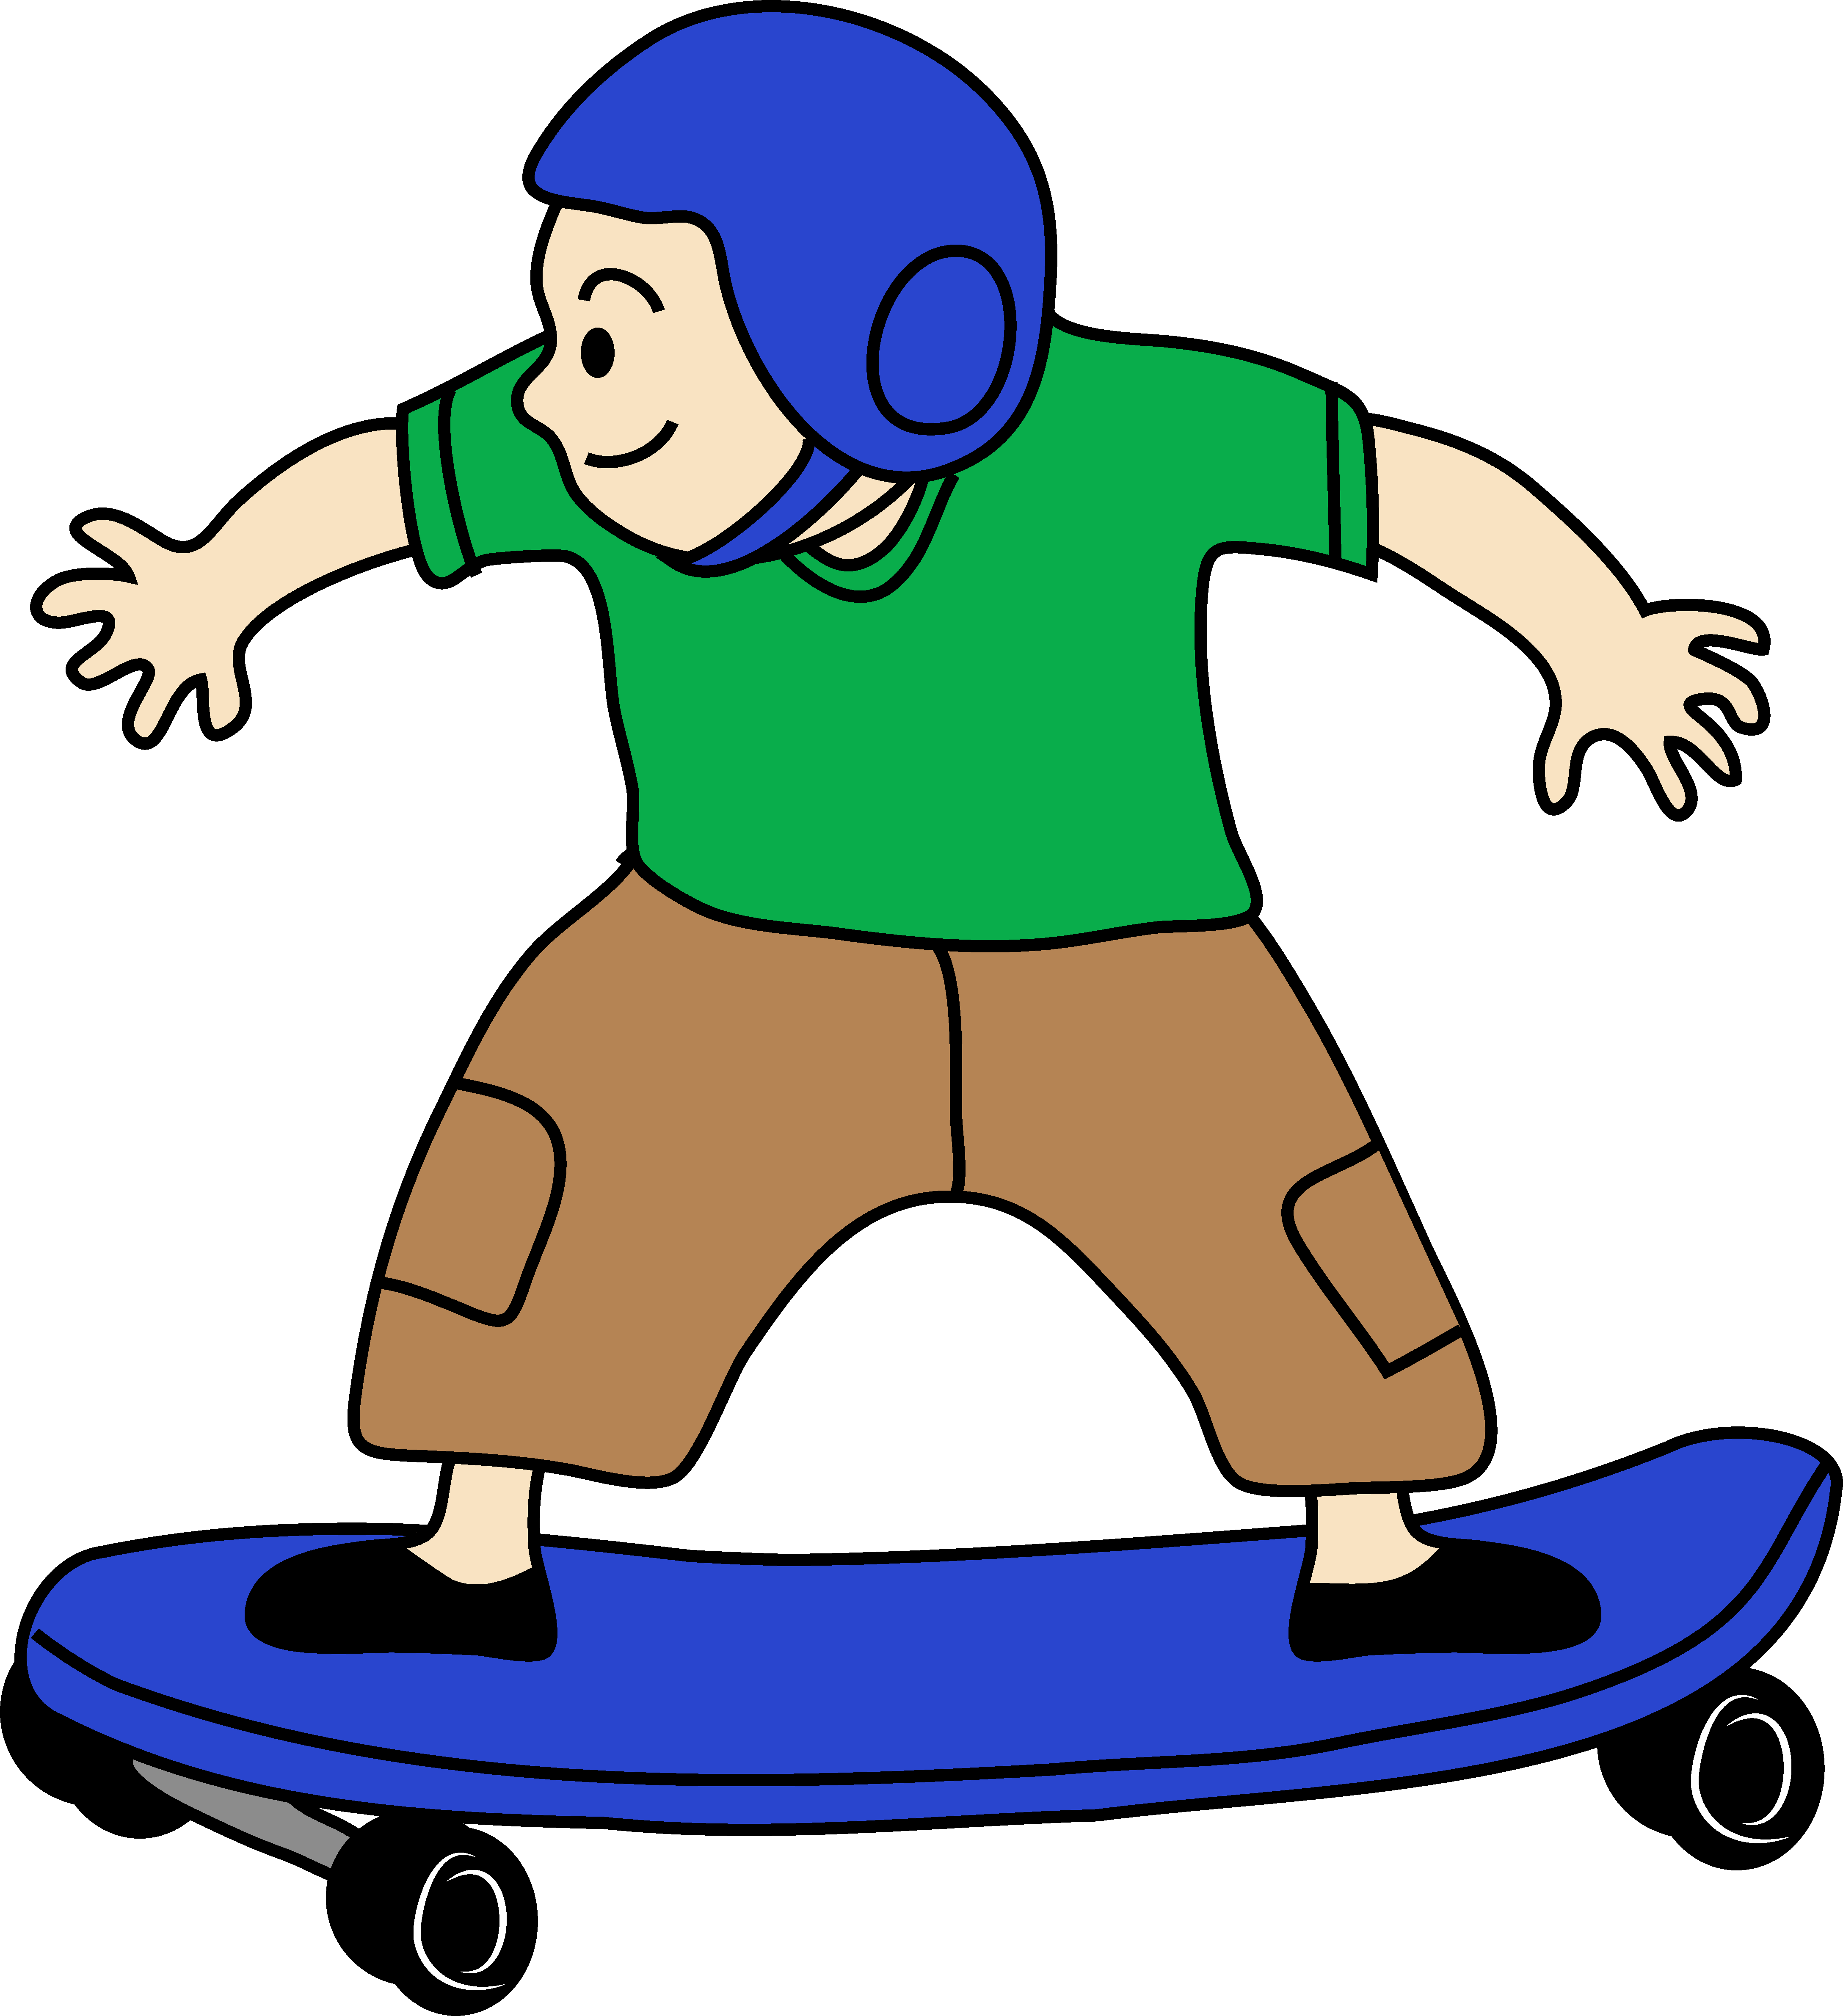 Skateboard Clipart - Free Clipart Images